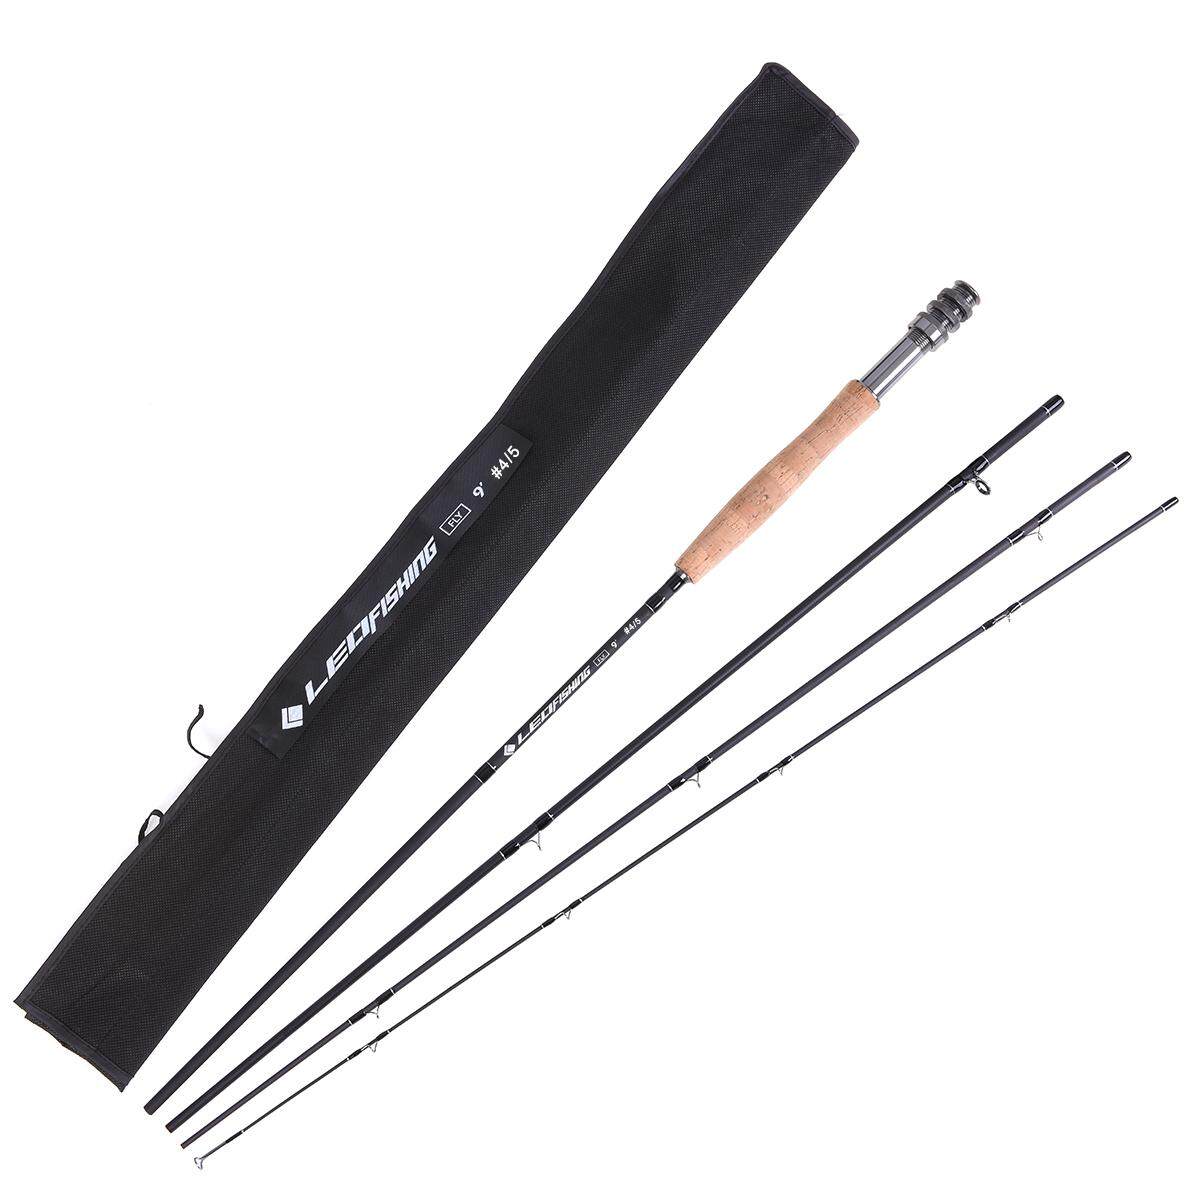 Carbon Fly Fishing Rod 9FT 2.7M 4 Section Fishing Rod Fishing Pole Soft Cork Handle Fly Rod